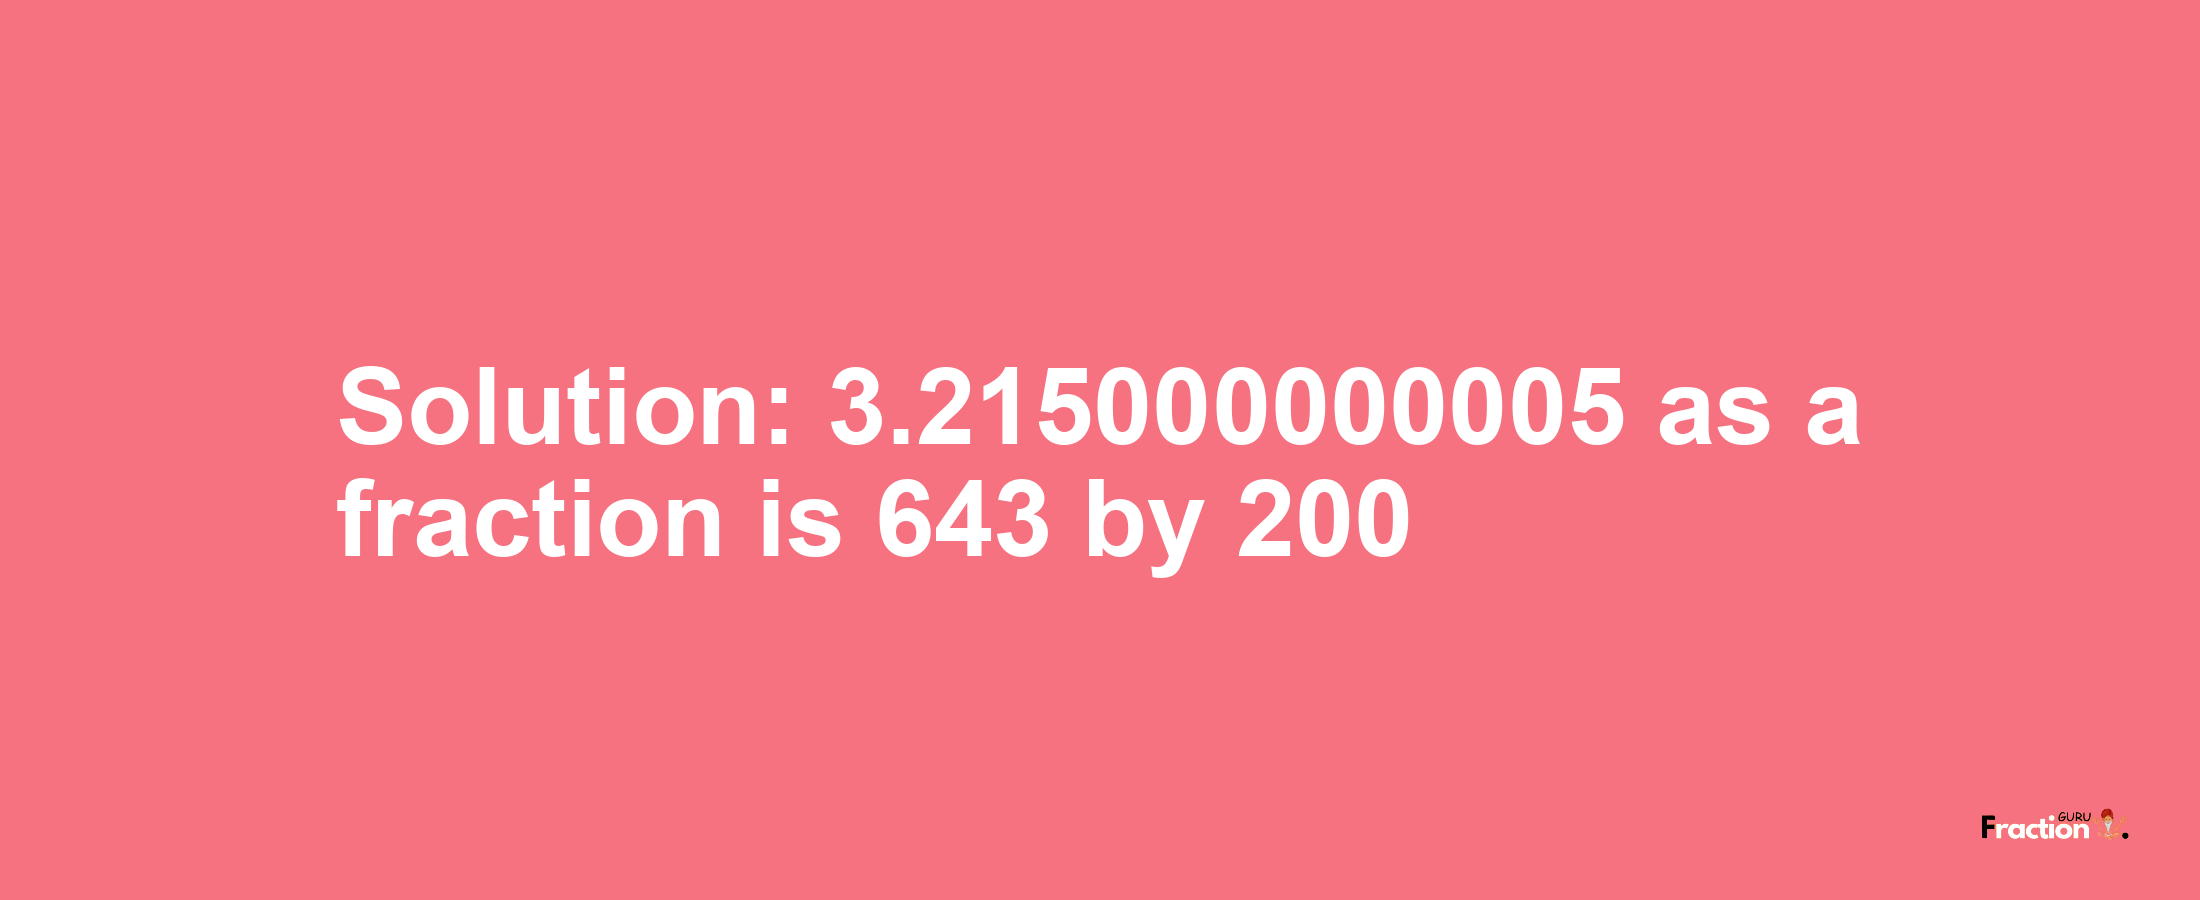 Solution:3.215000000005 as a fraction is 643/200